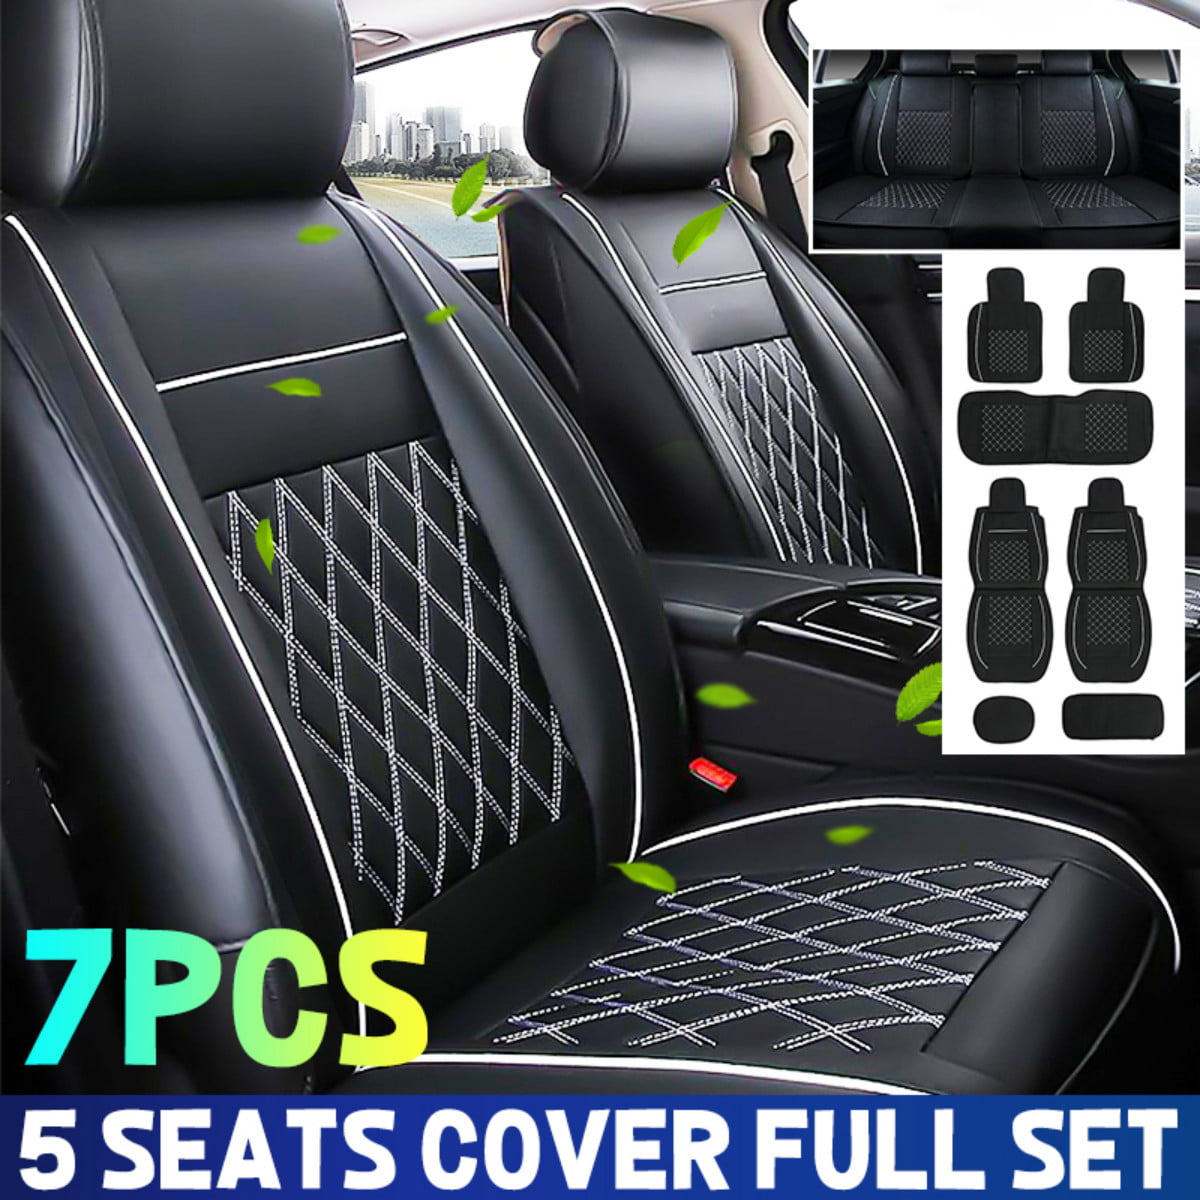 Breathable Printing Car Seat Protectors with Steering Wheel Cover and Shoulder Pads Automobiles Car Interior Accessories Blue Yous Auto Car Seat Covers for Front and Rear